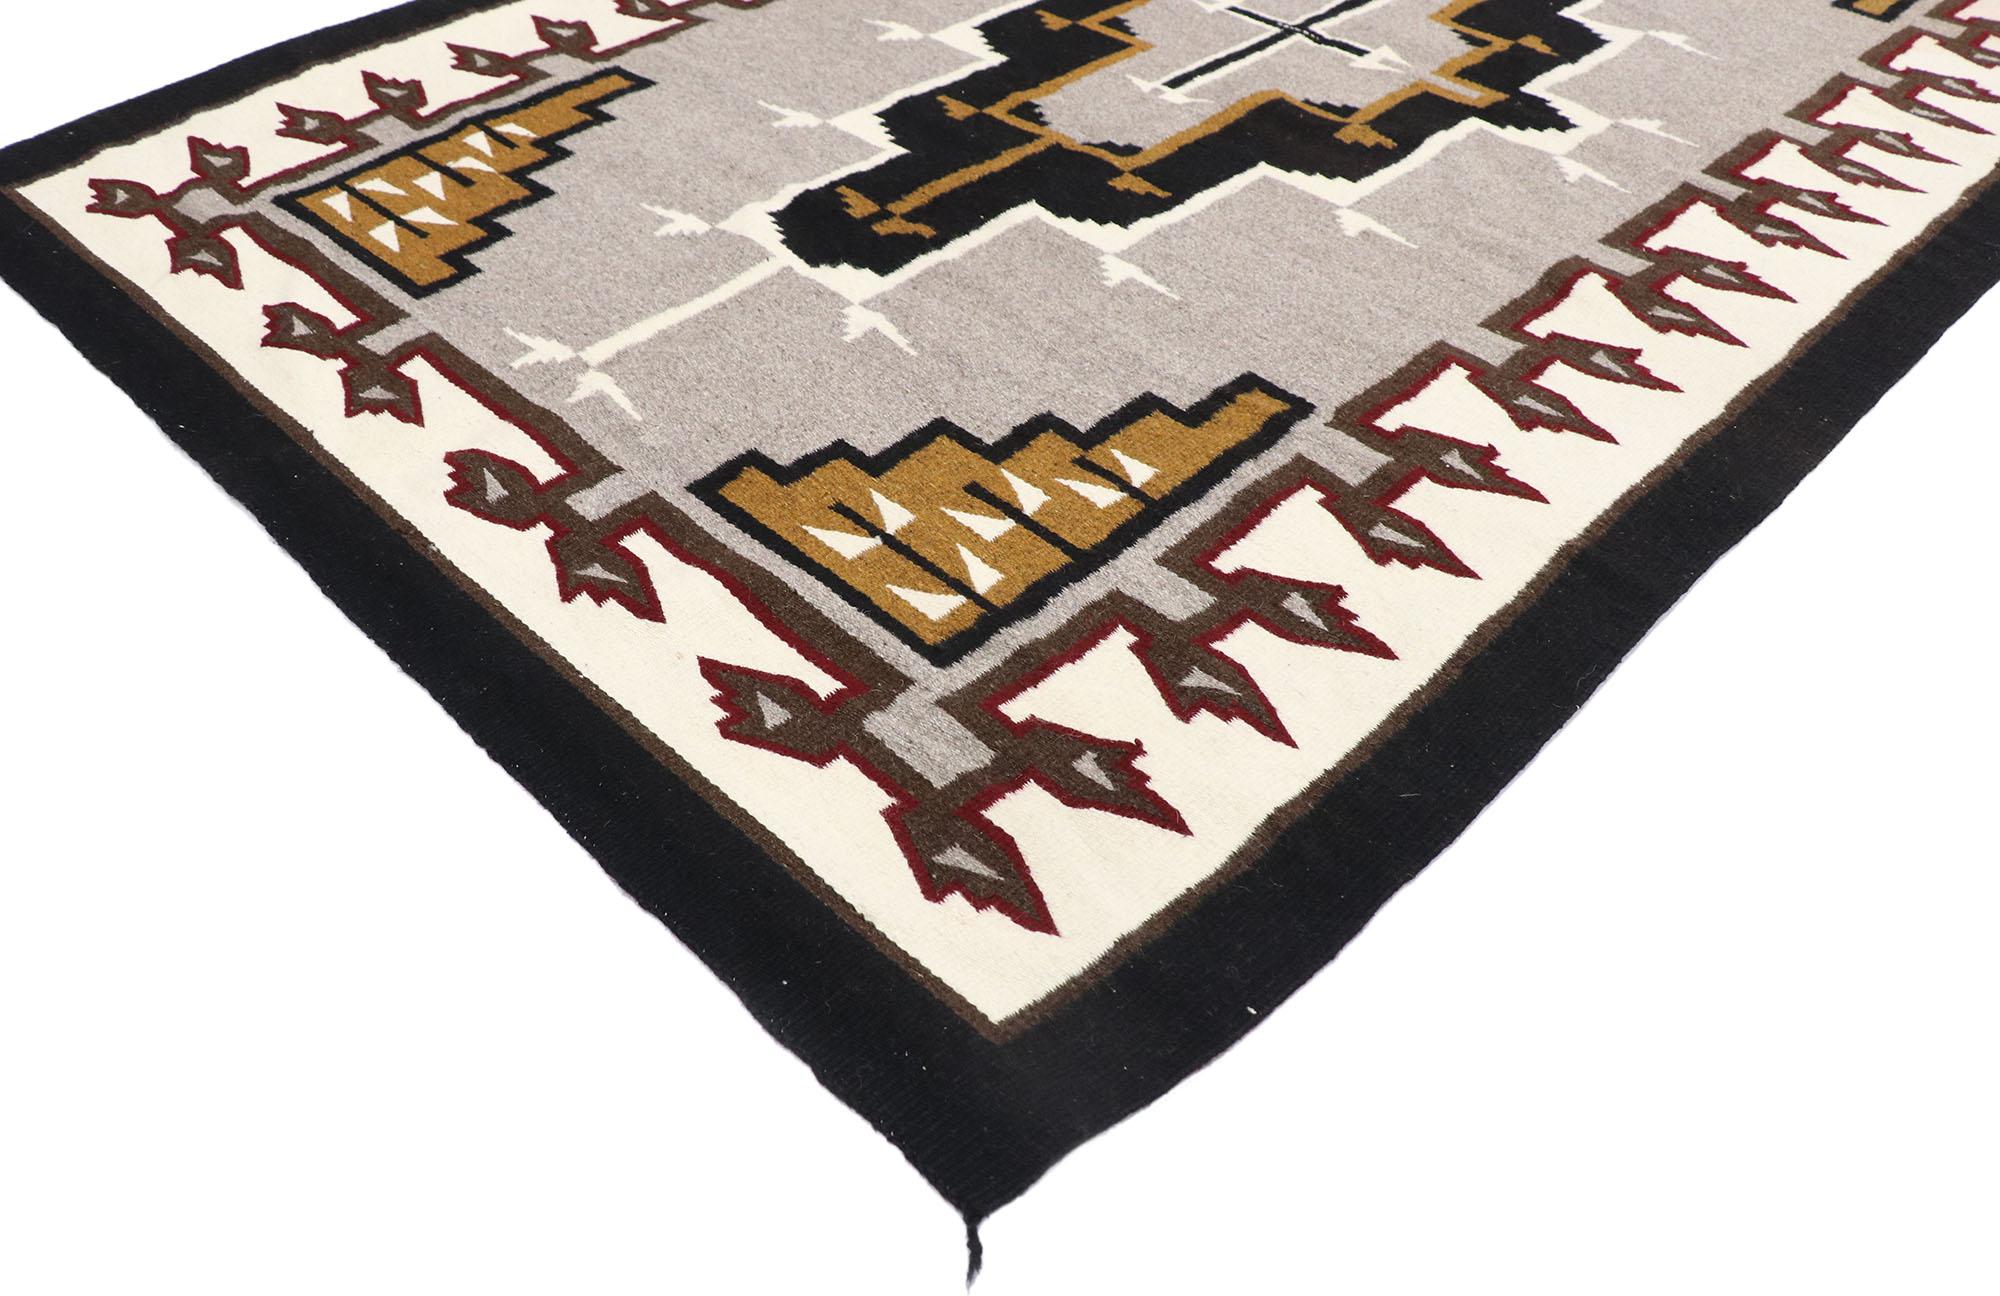 77770 vintage Navajo Kilim rug with two grey hills style 04'06 x 07'02. With its bold expressive design, incredible detail and texture, this hand-woven wool vintage Navajo Kilim rug is a captivating vision of woven beauty highlighting Native